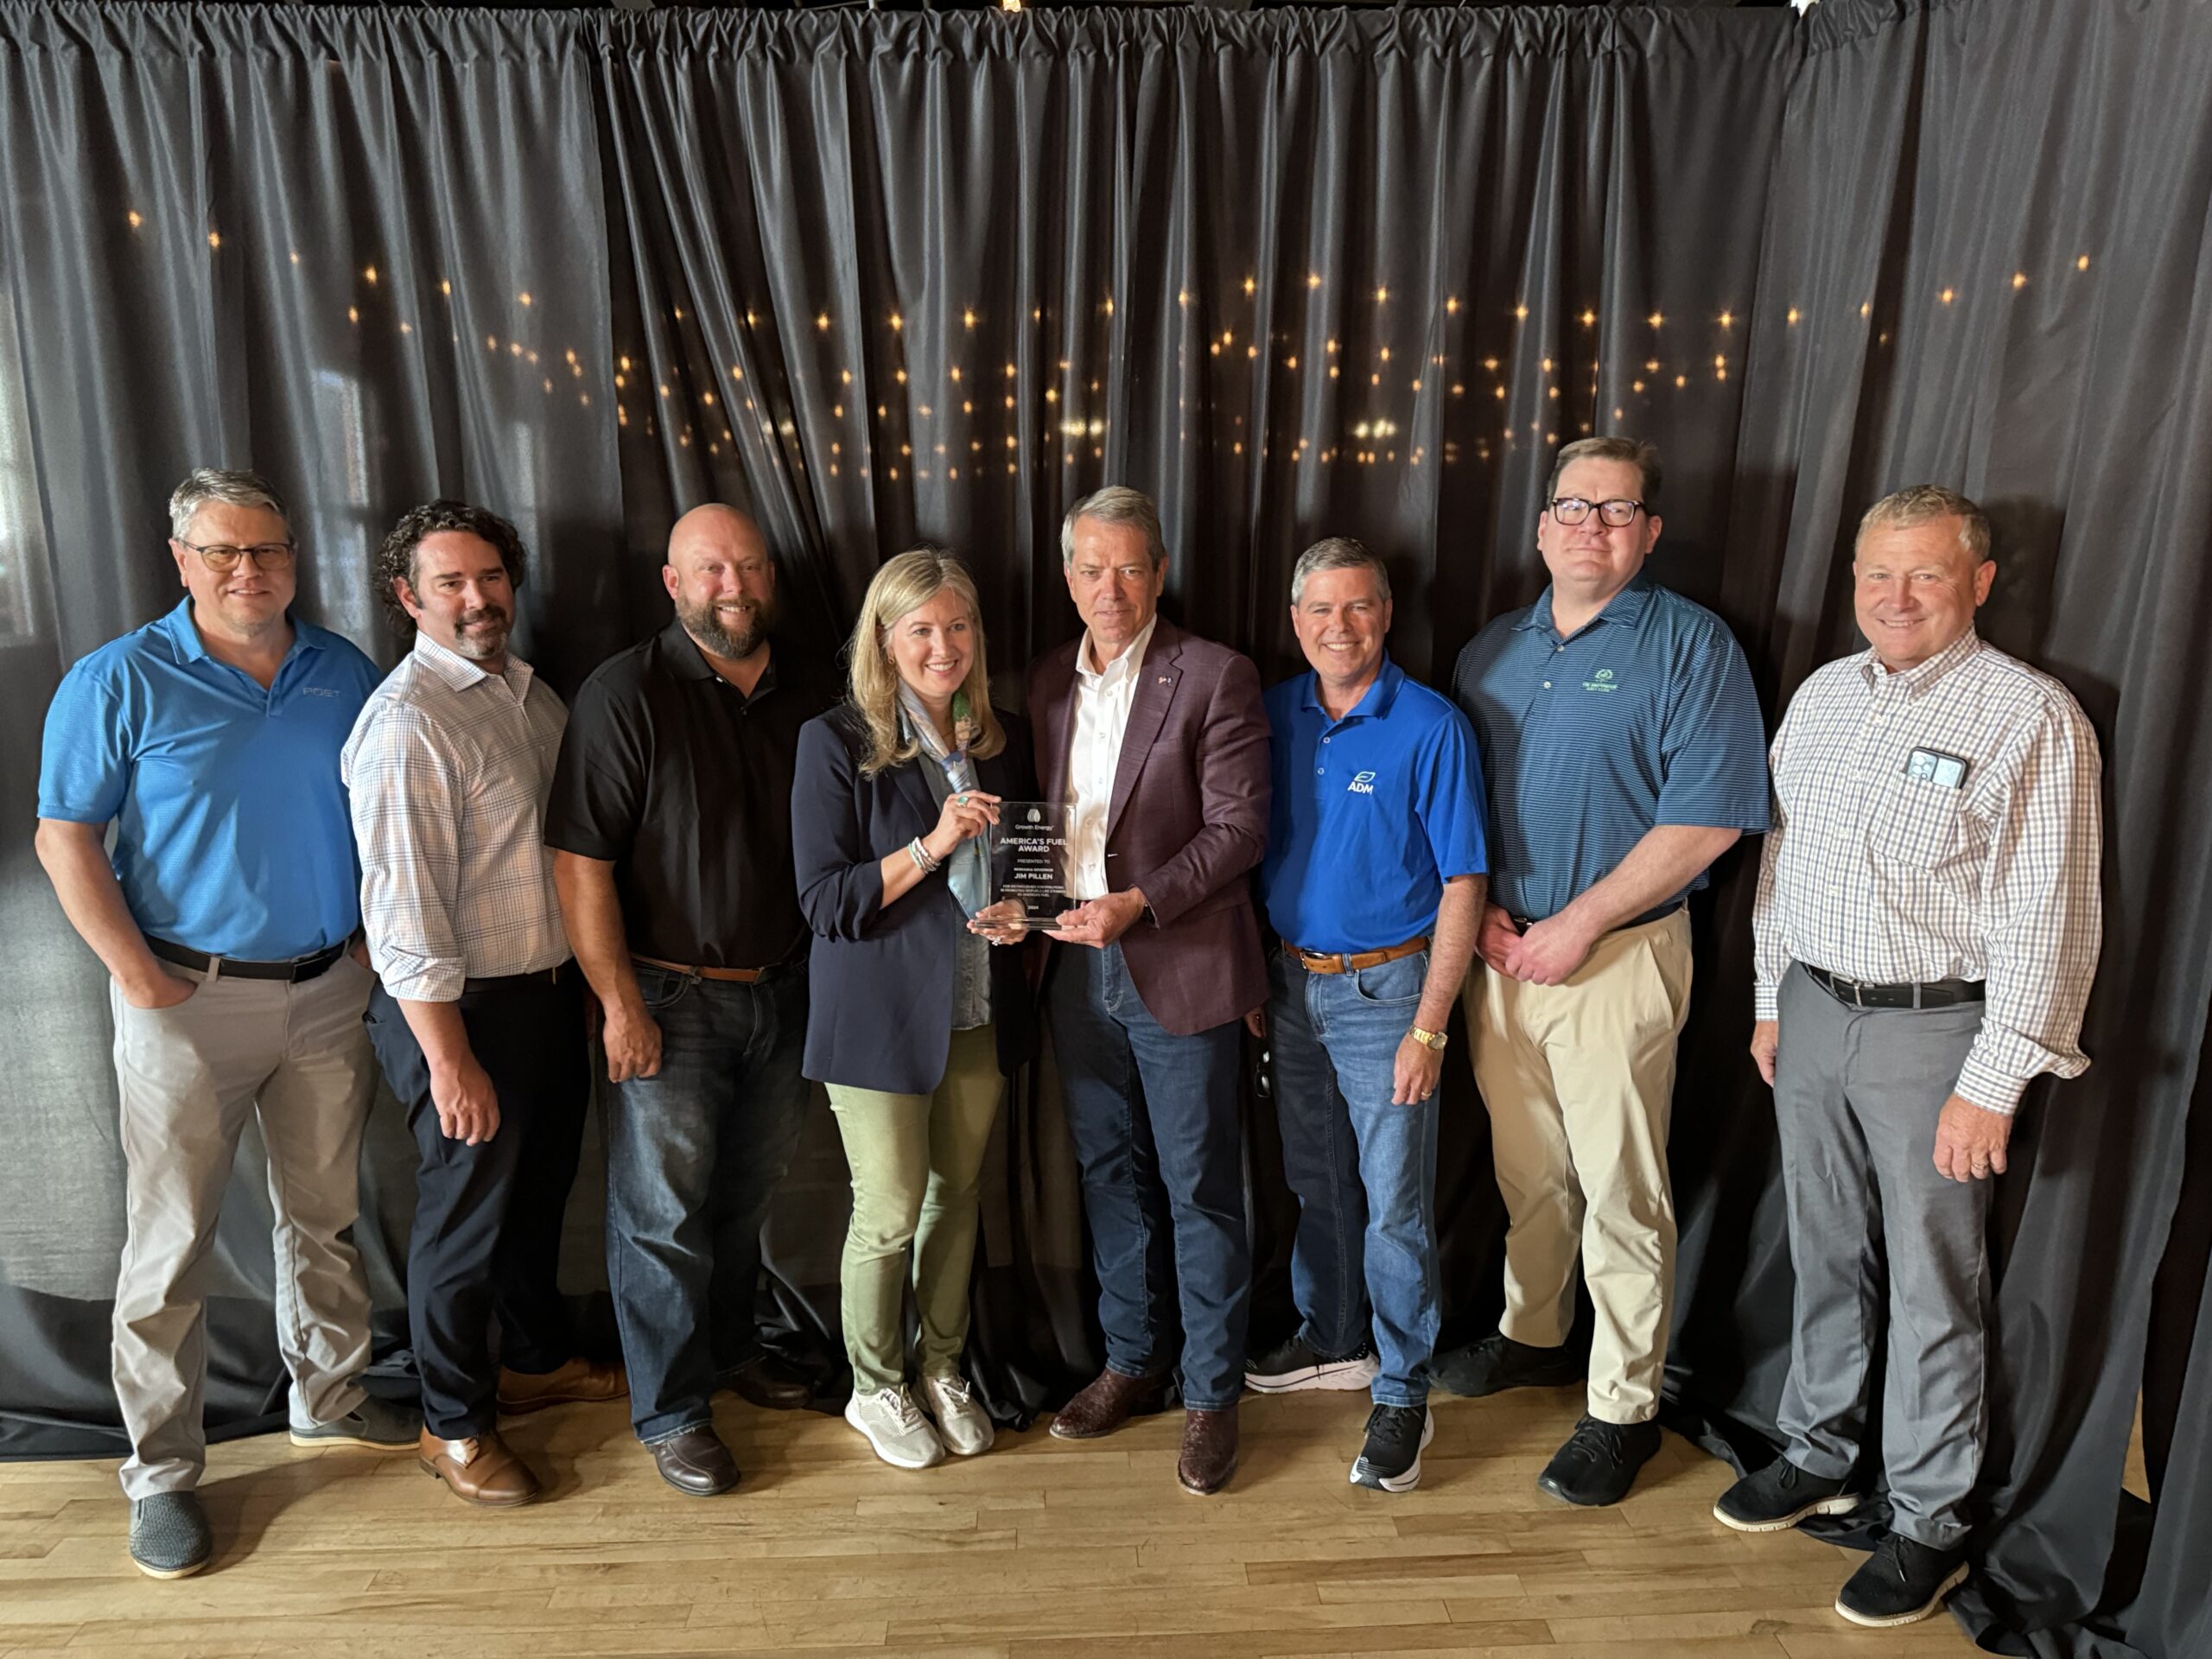 Governor Pillen (center) is pictured here with Growth Energy CEO Emily Skor (to Pillen's left) and a group of Growth Energy members and biofuels supporters as they present him with America's Fuel Award.